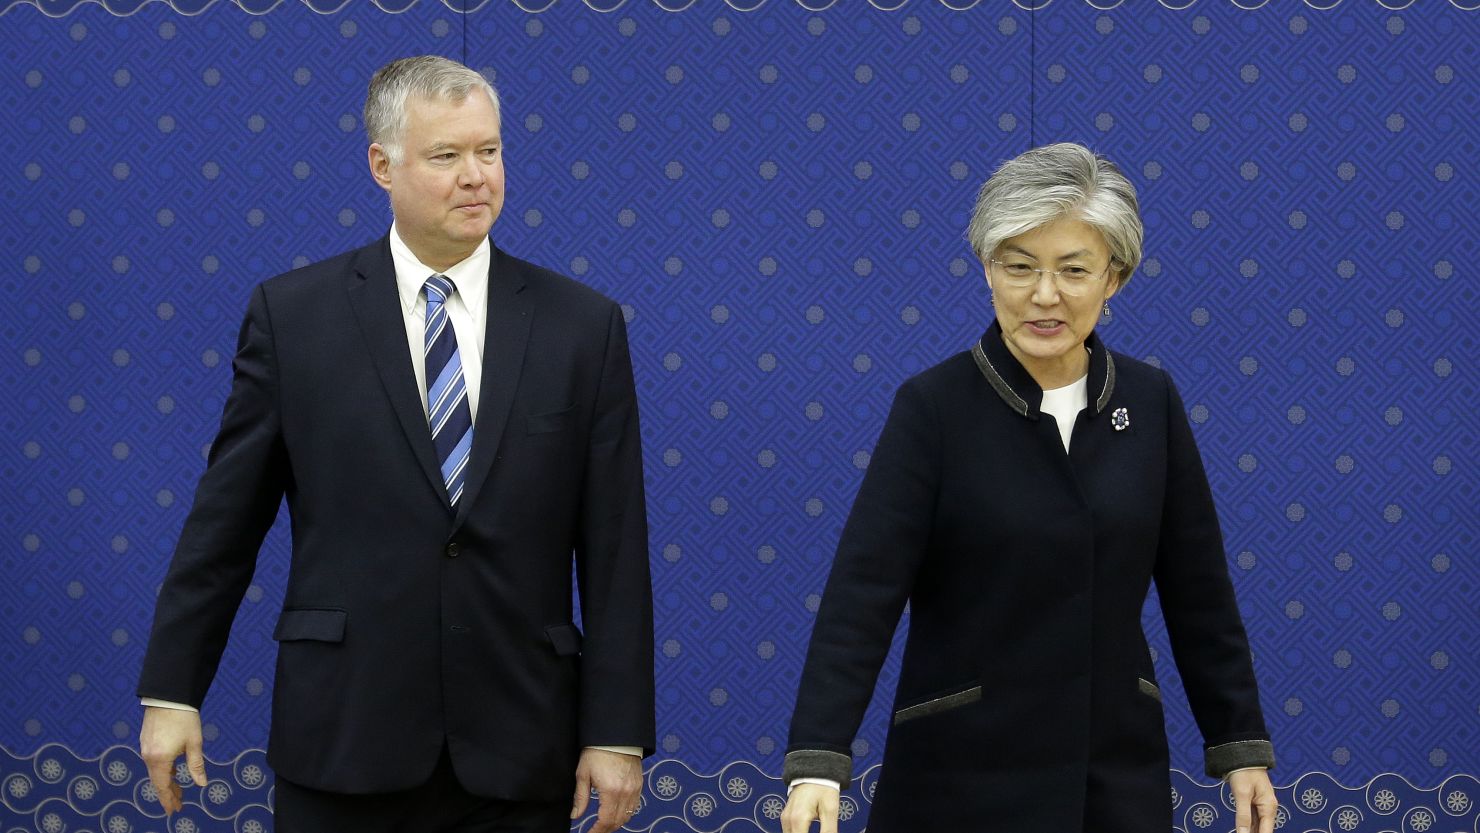 US special representative for North Korea Stephen Biegun and South Korean Foreign Minister Kang Kyung-wha seen in Seoul on October 29, 2018.